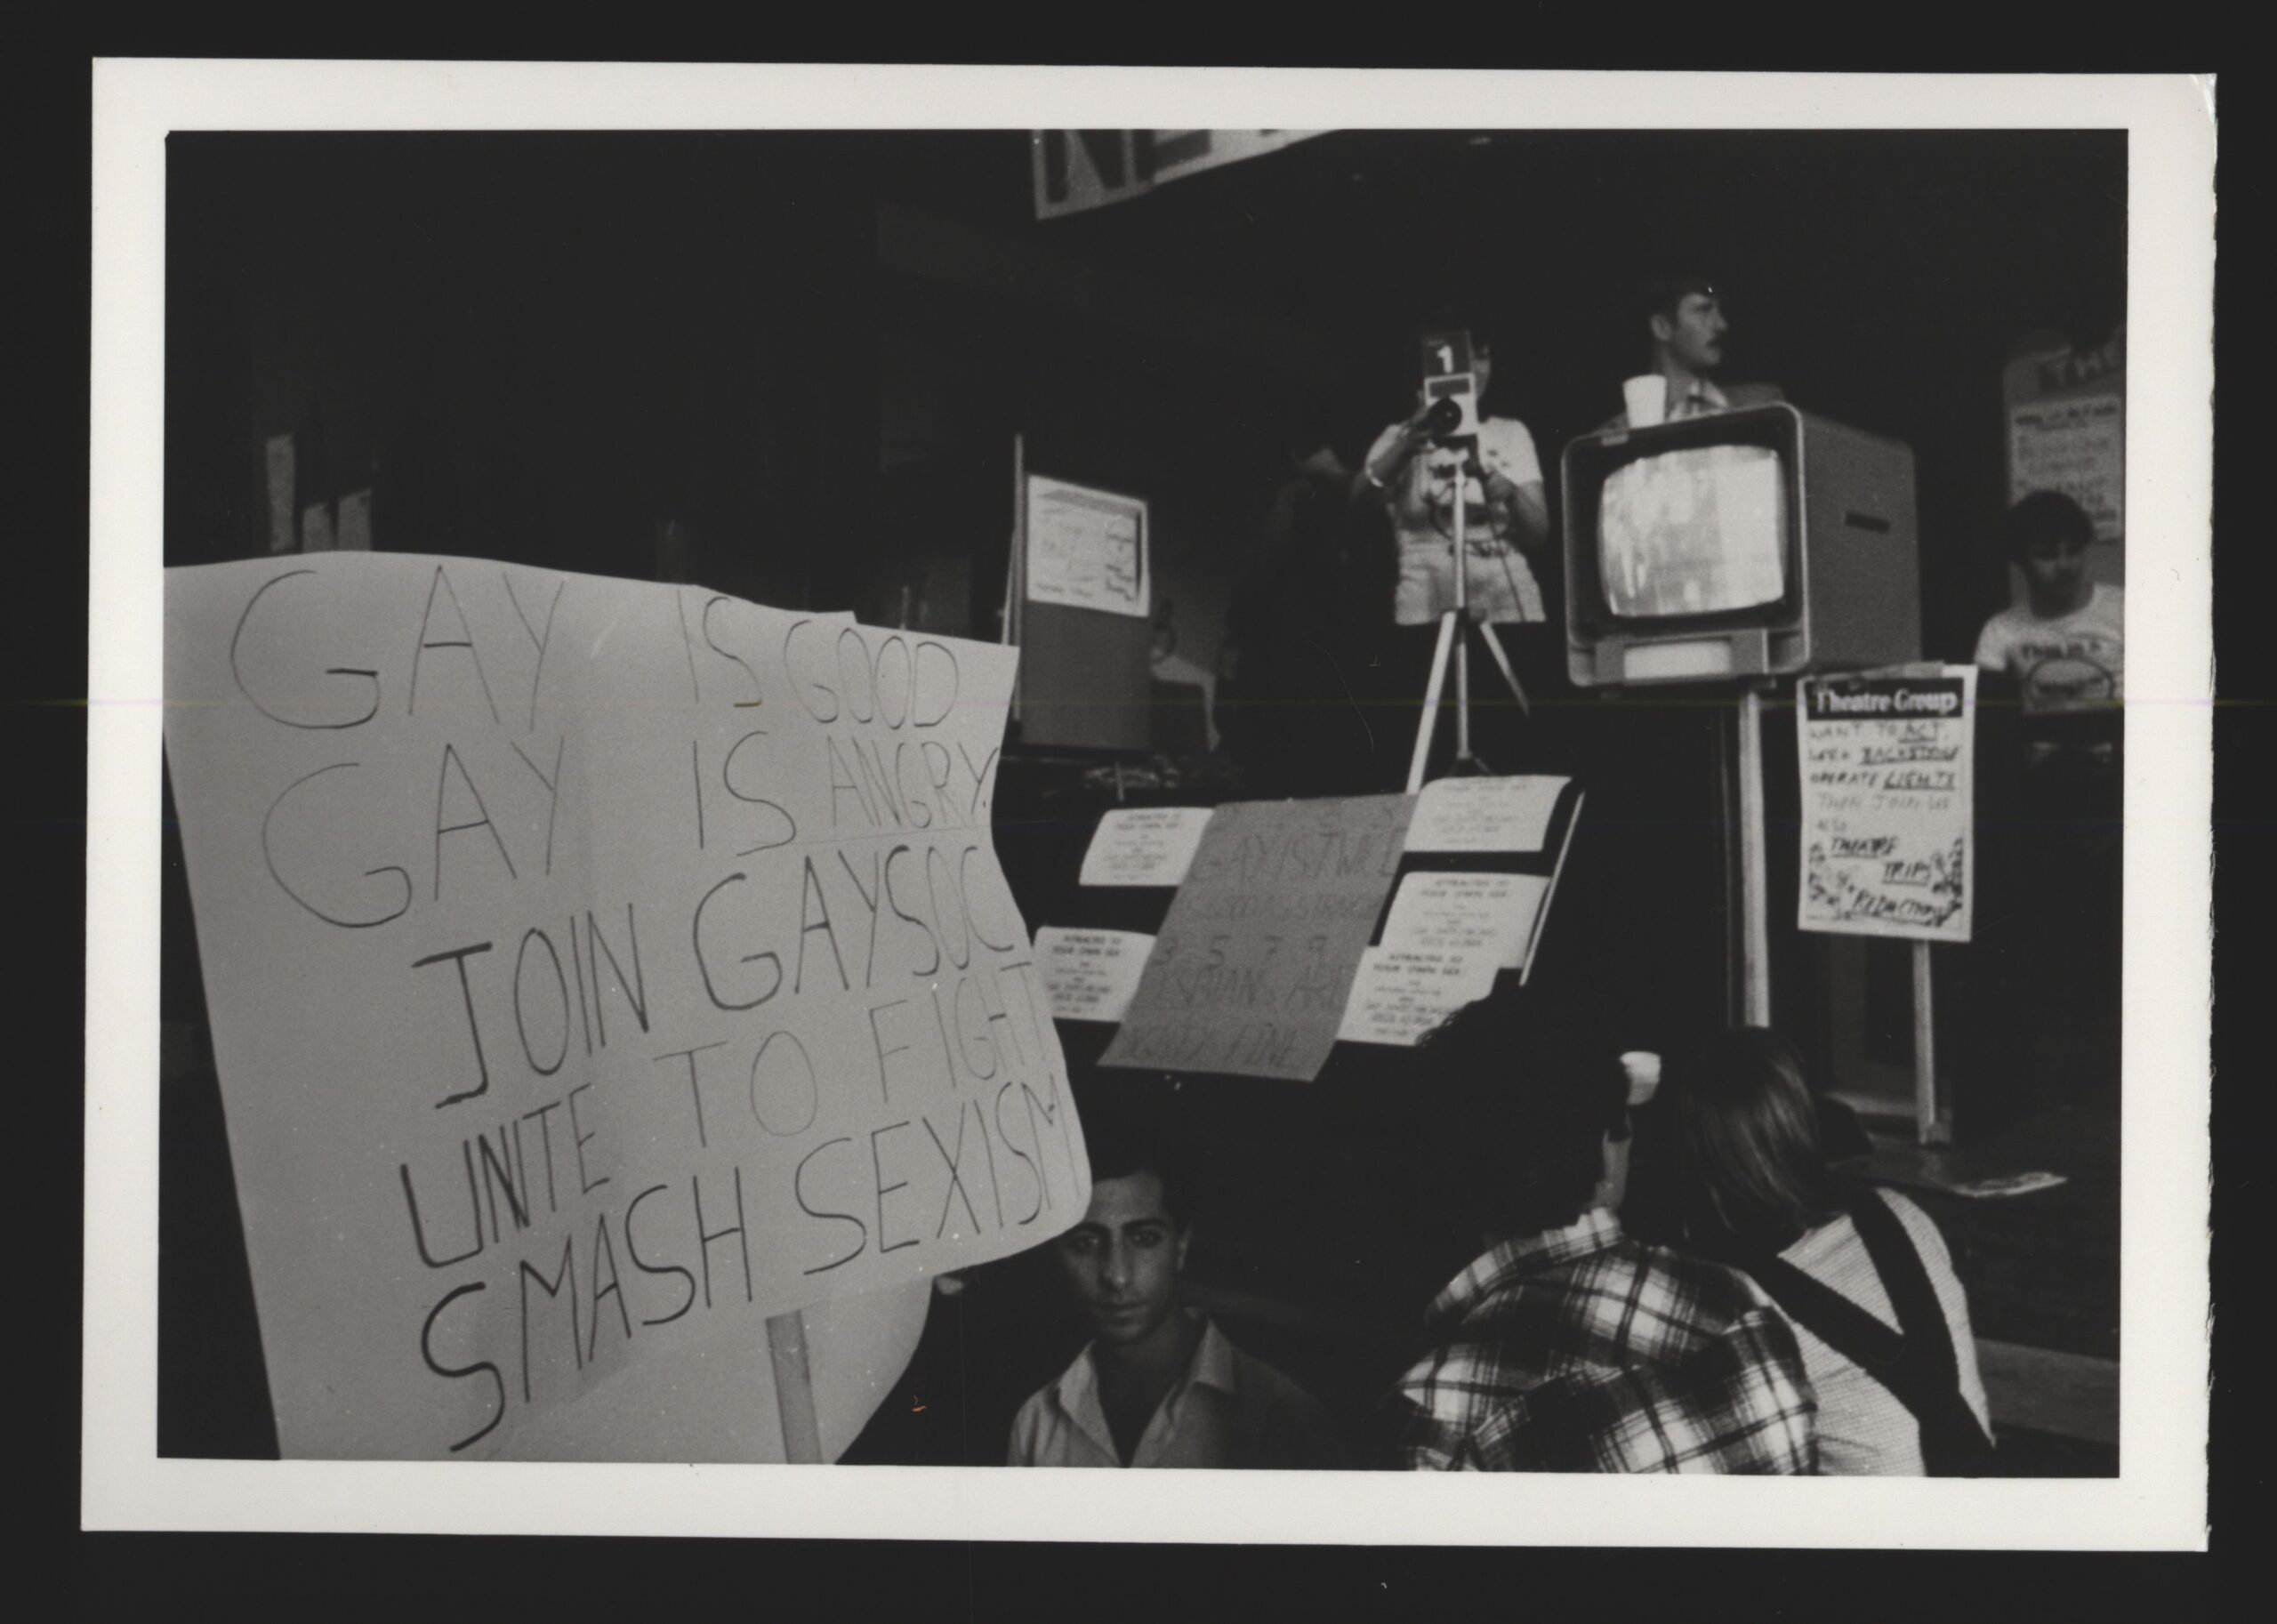 A black and white photo of a protest including the banner 'Gay is good'